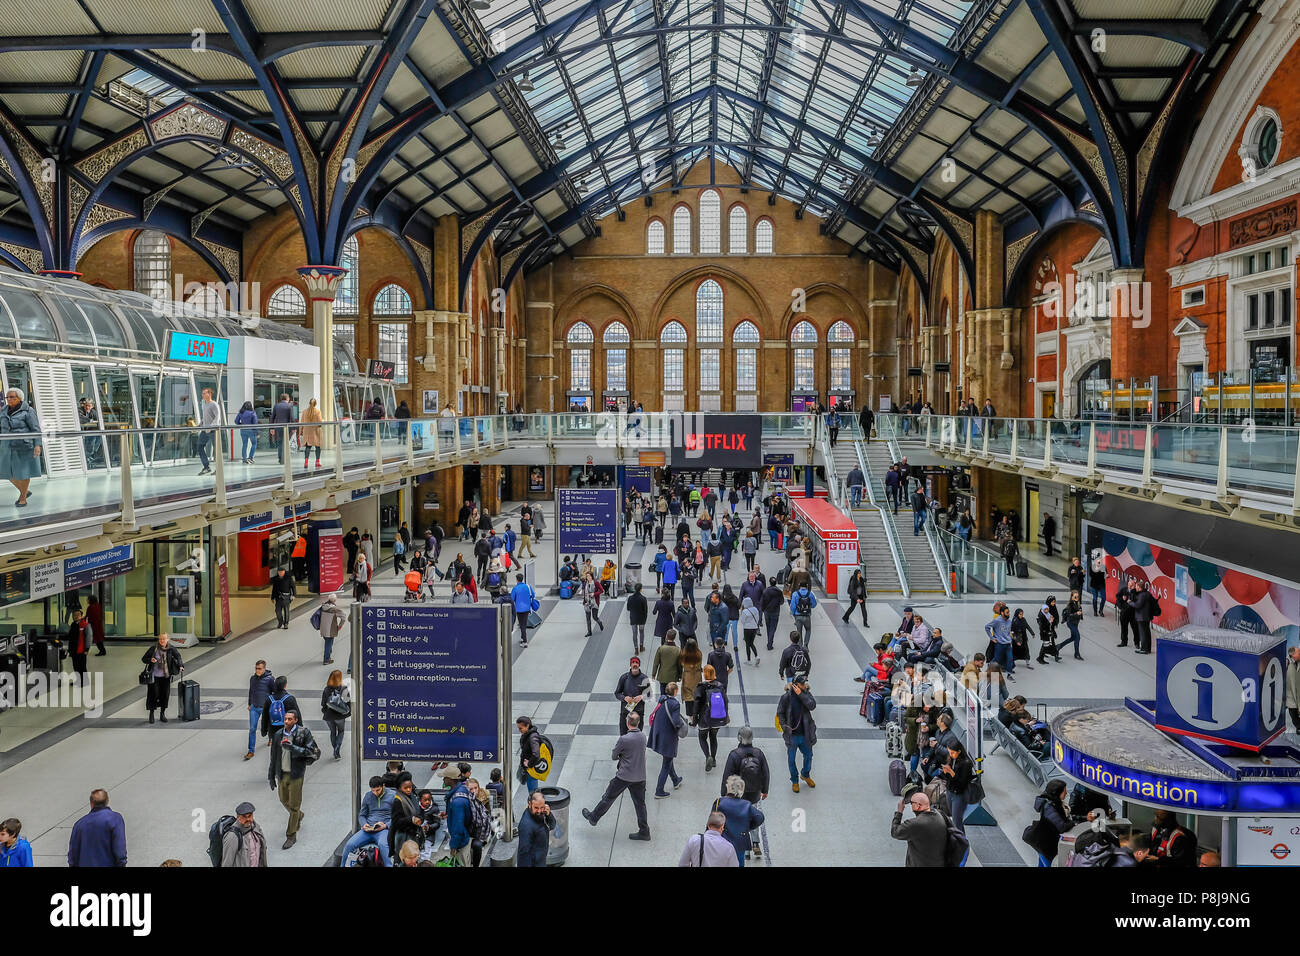 Liverpool Street, London, UK - April 6, 2018: Busy Liverpool Street Mainline Station, shows concourse and architecture of this stunning building. Stock Photo